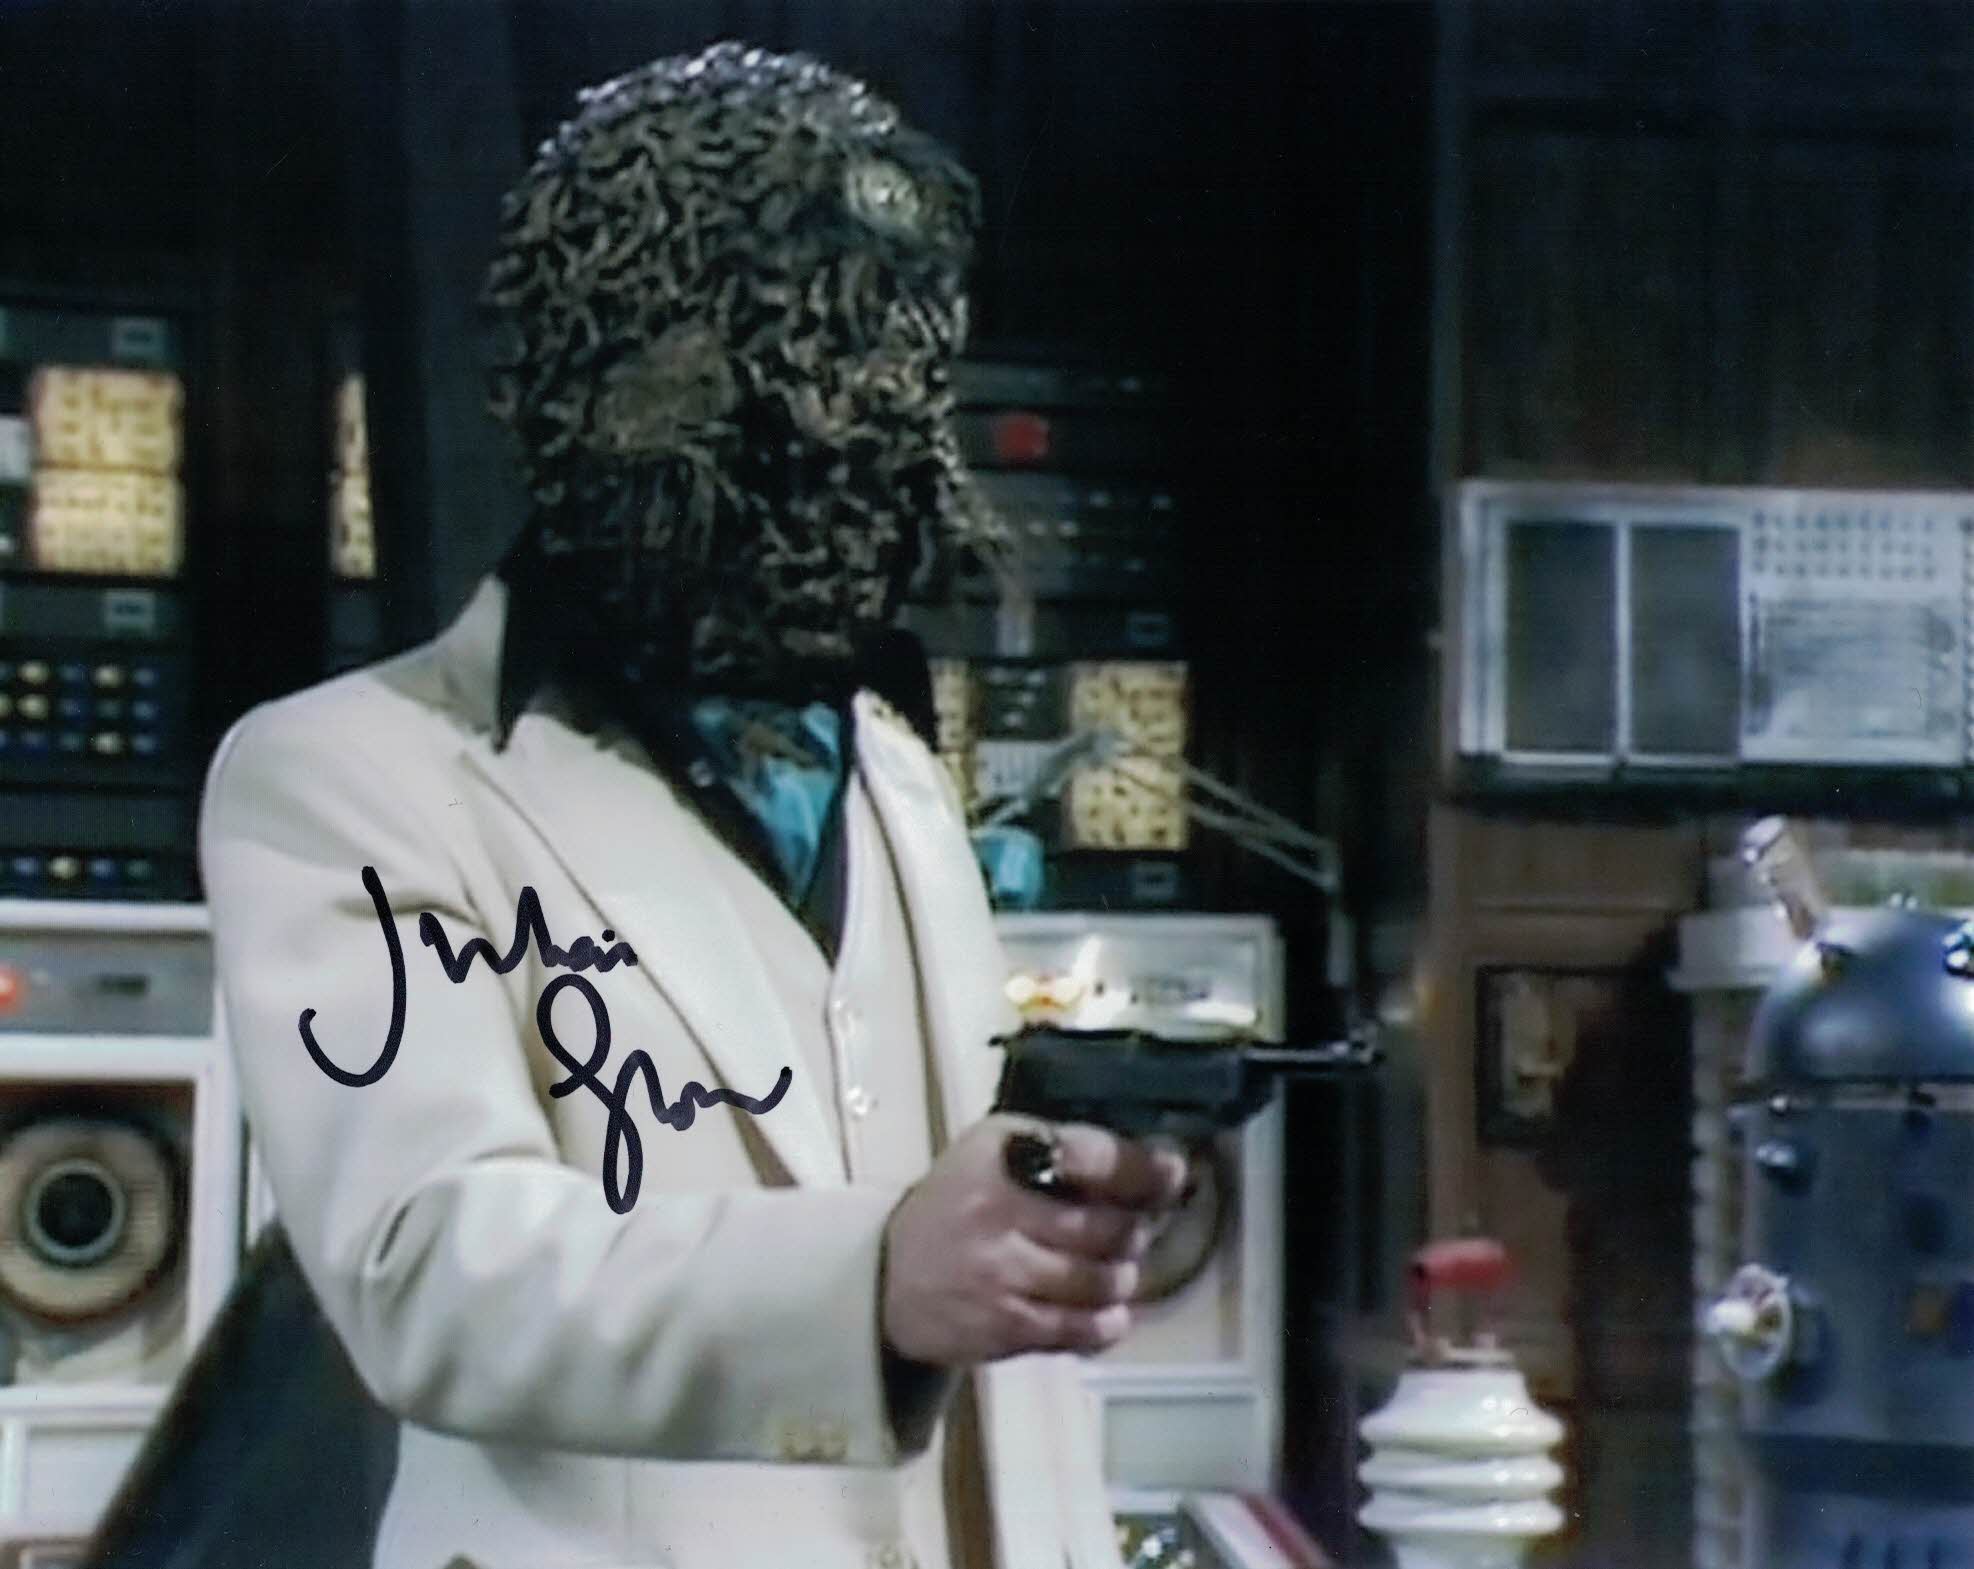 JULIAN GLOVER - Scarlioni - City of Death Doctor Who -  hand signed 10 x 8 photo